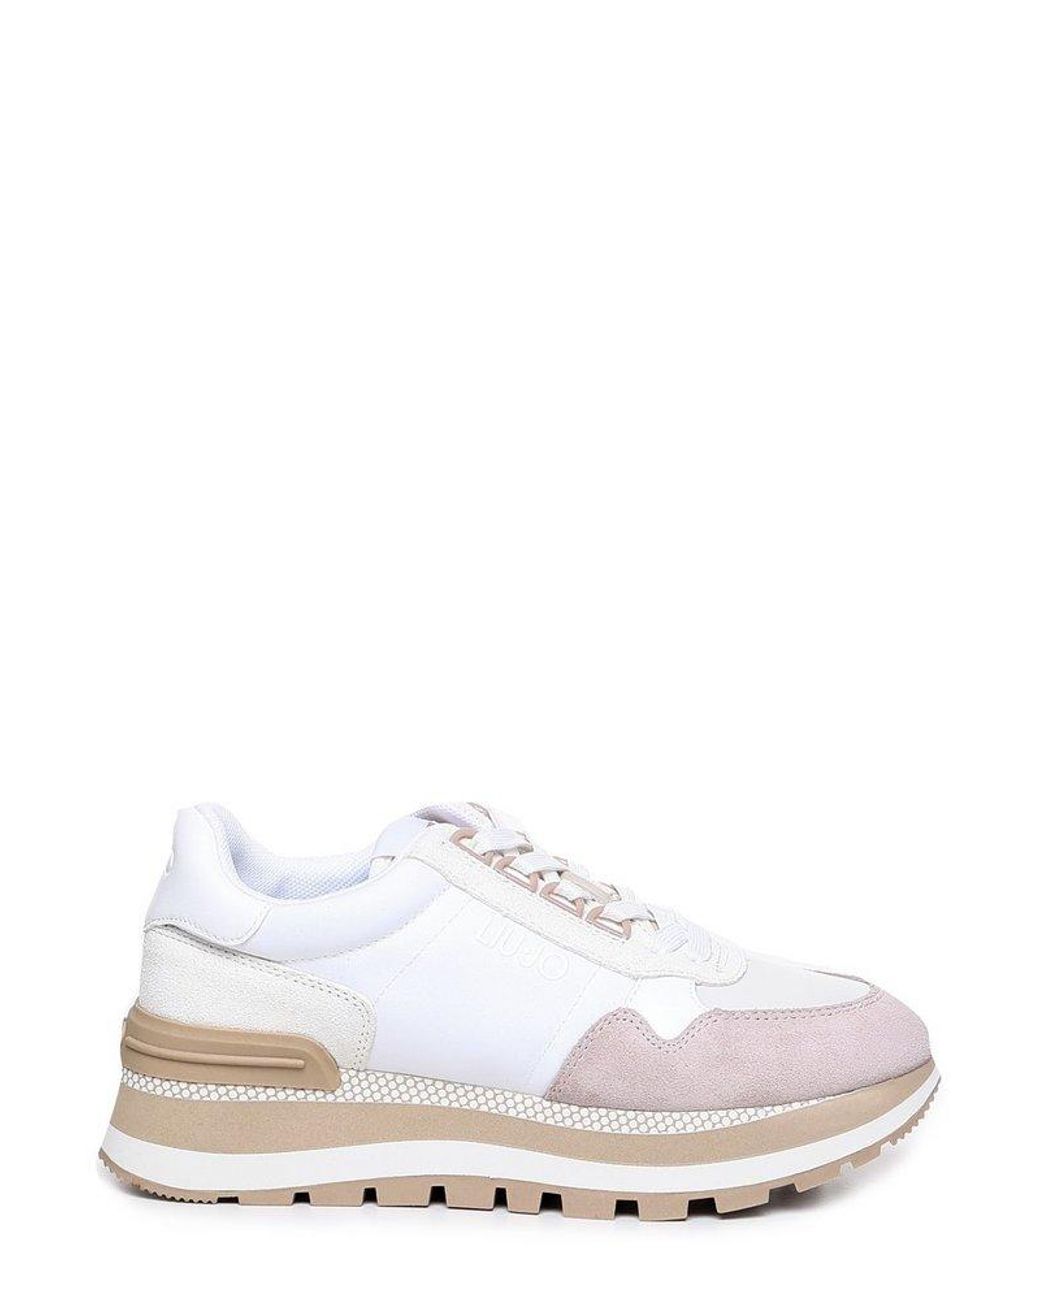 Liu Jo Panelled Lace-up Chunky Sole Sneakers in White | Lyst